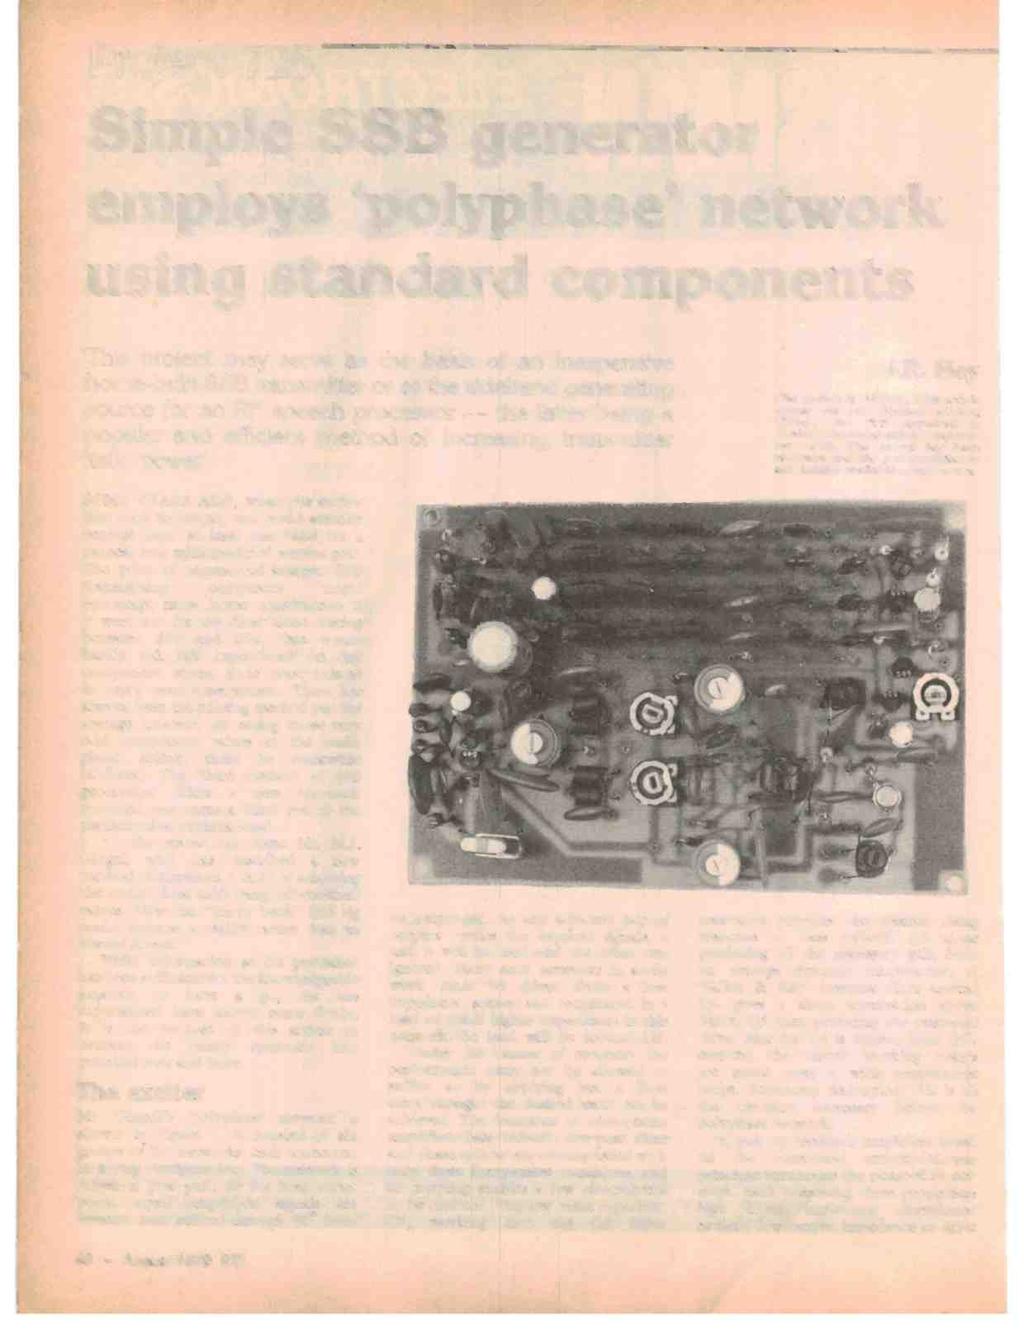 PTcD:eic 725 Simple SSB generator employs `polyphase' network using standard components This project may serve as the basis of an inexpensive home -built SSB transmitter or as the sideband generating